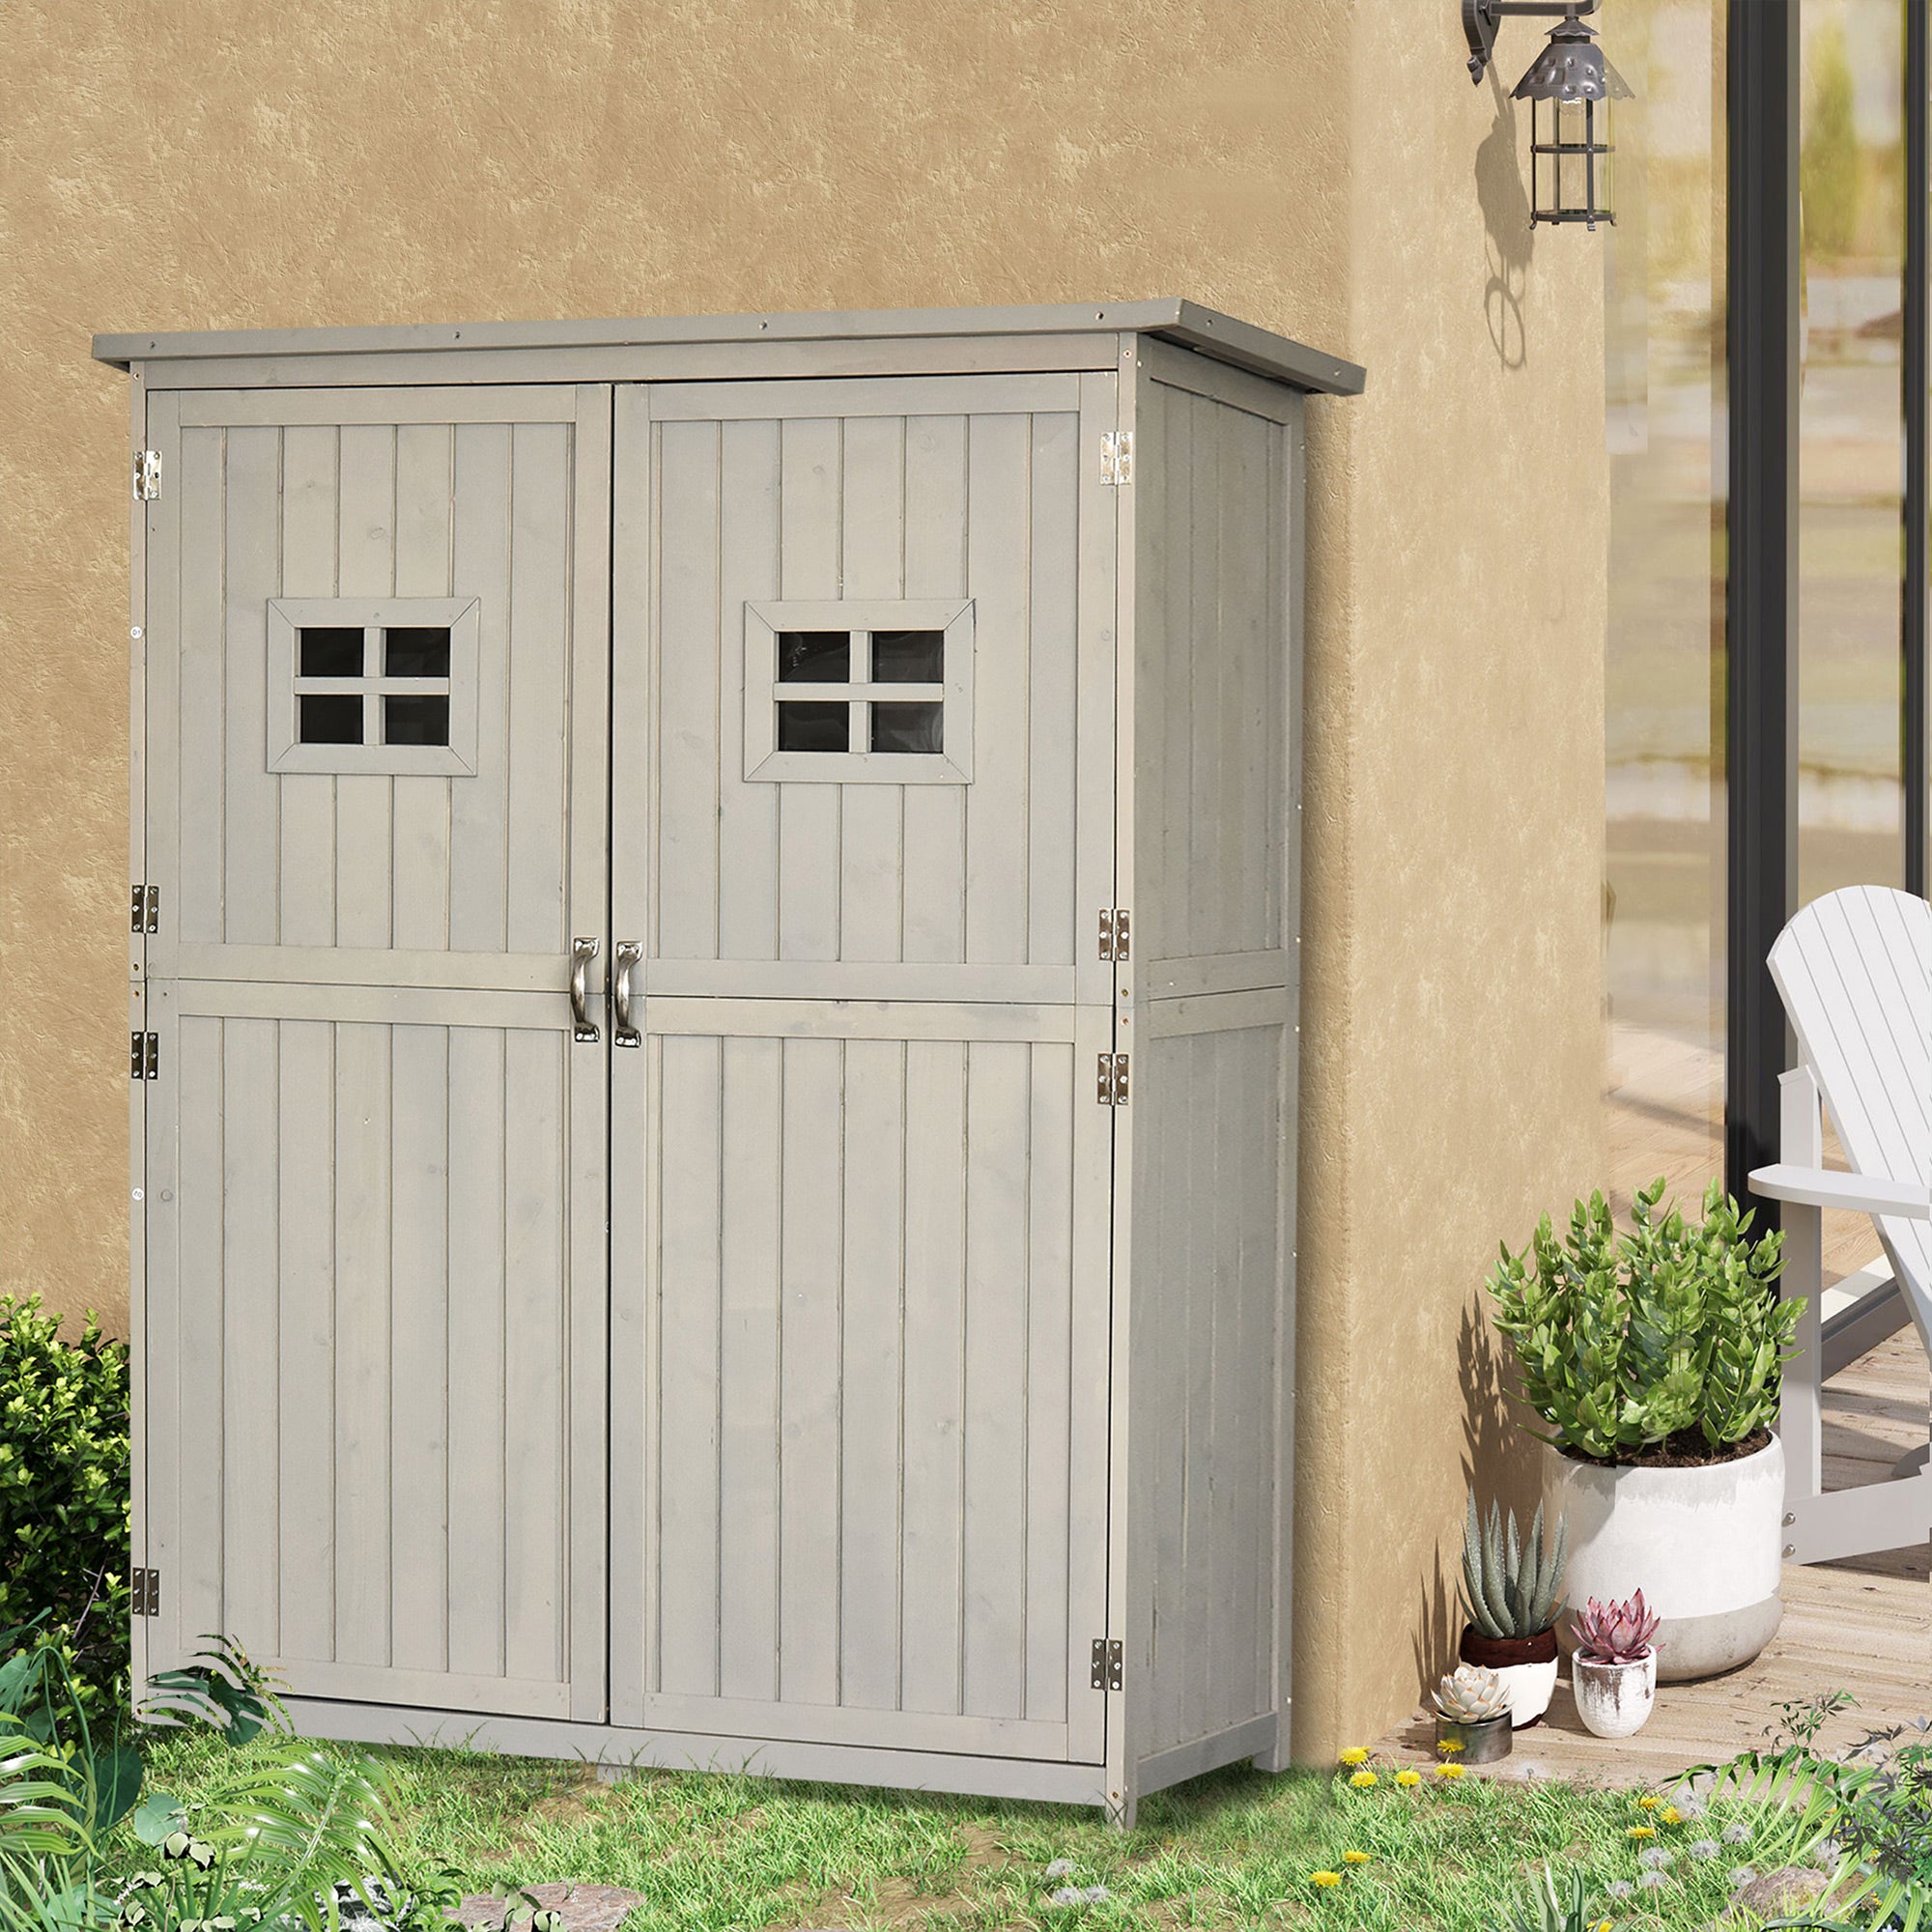 Outsunny Wooden Garden Shed Tool Storage Outsunny Wooden Garden Shed w/ Two Windows, Tool Storage Cabinet, 127.5L x 50W x 164H cm, Grey - Inspirely